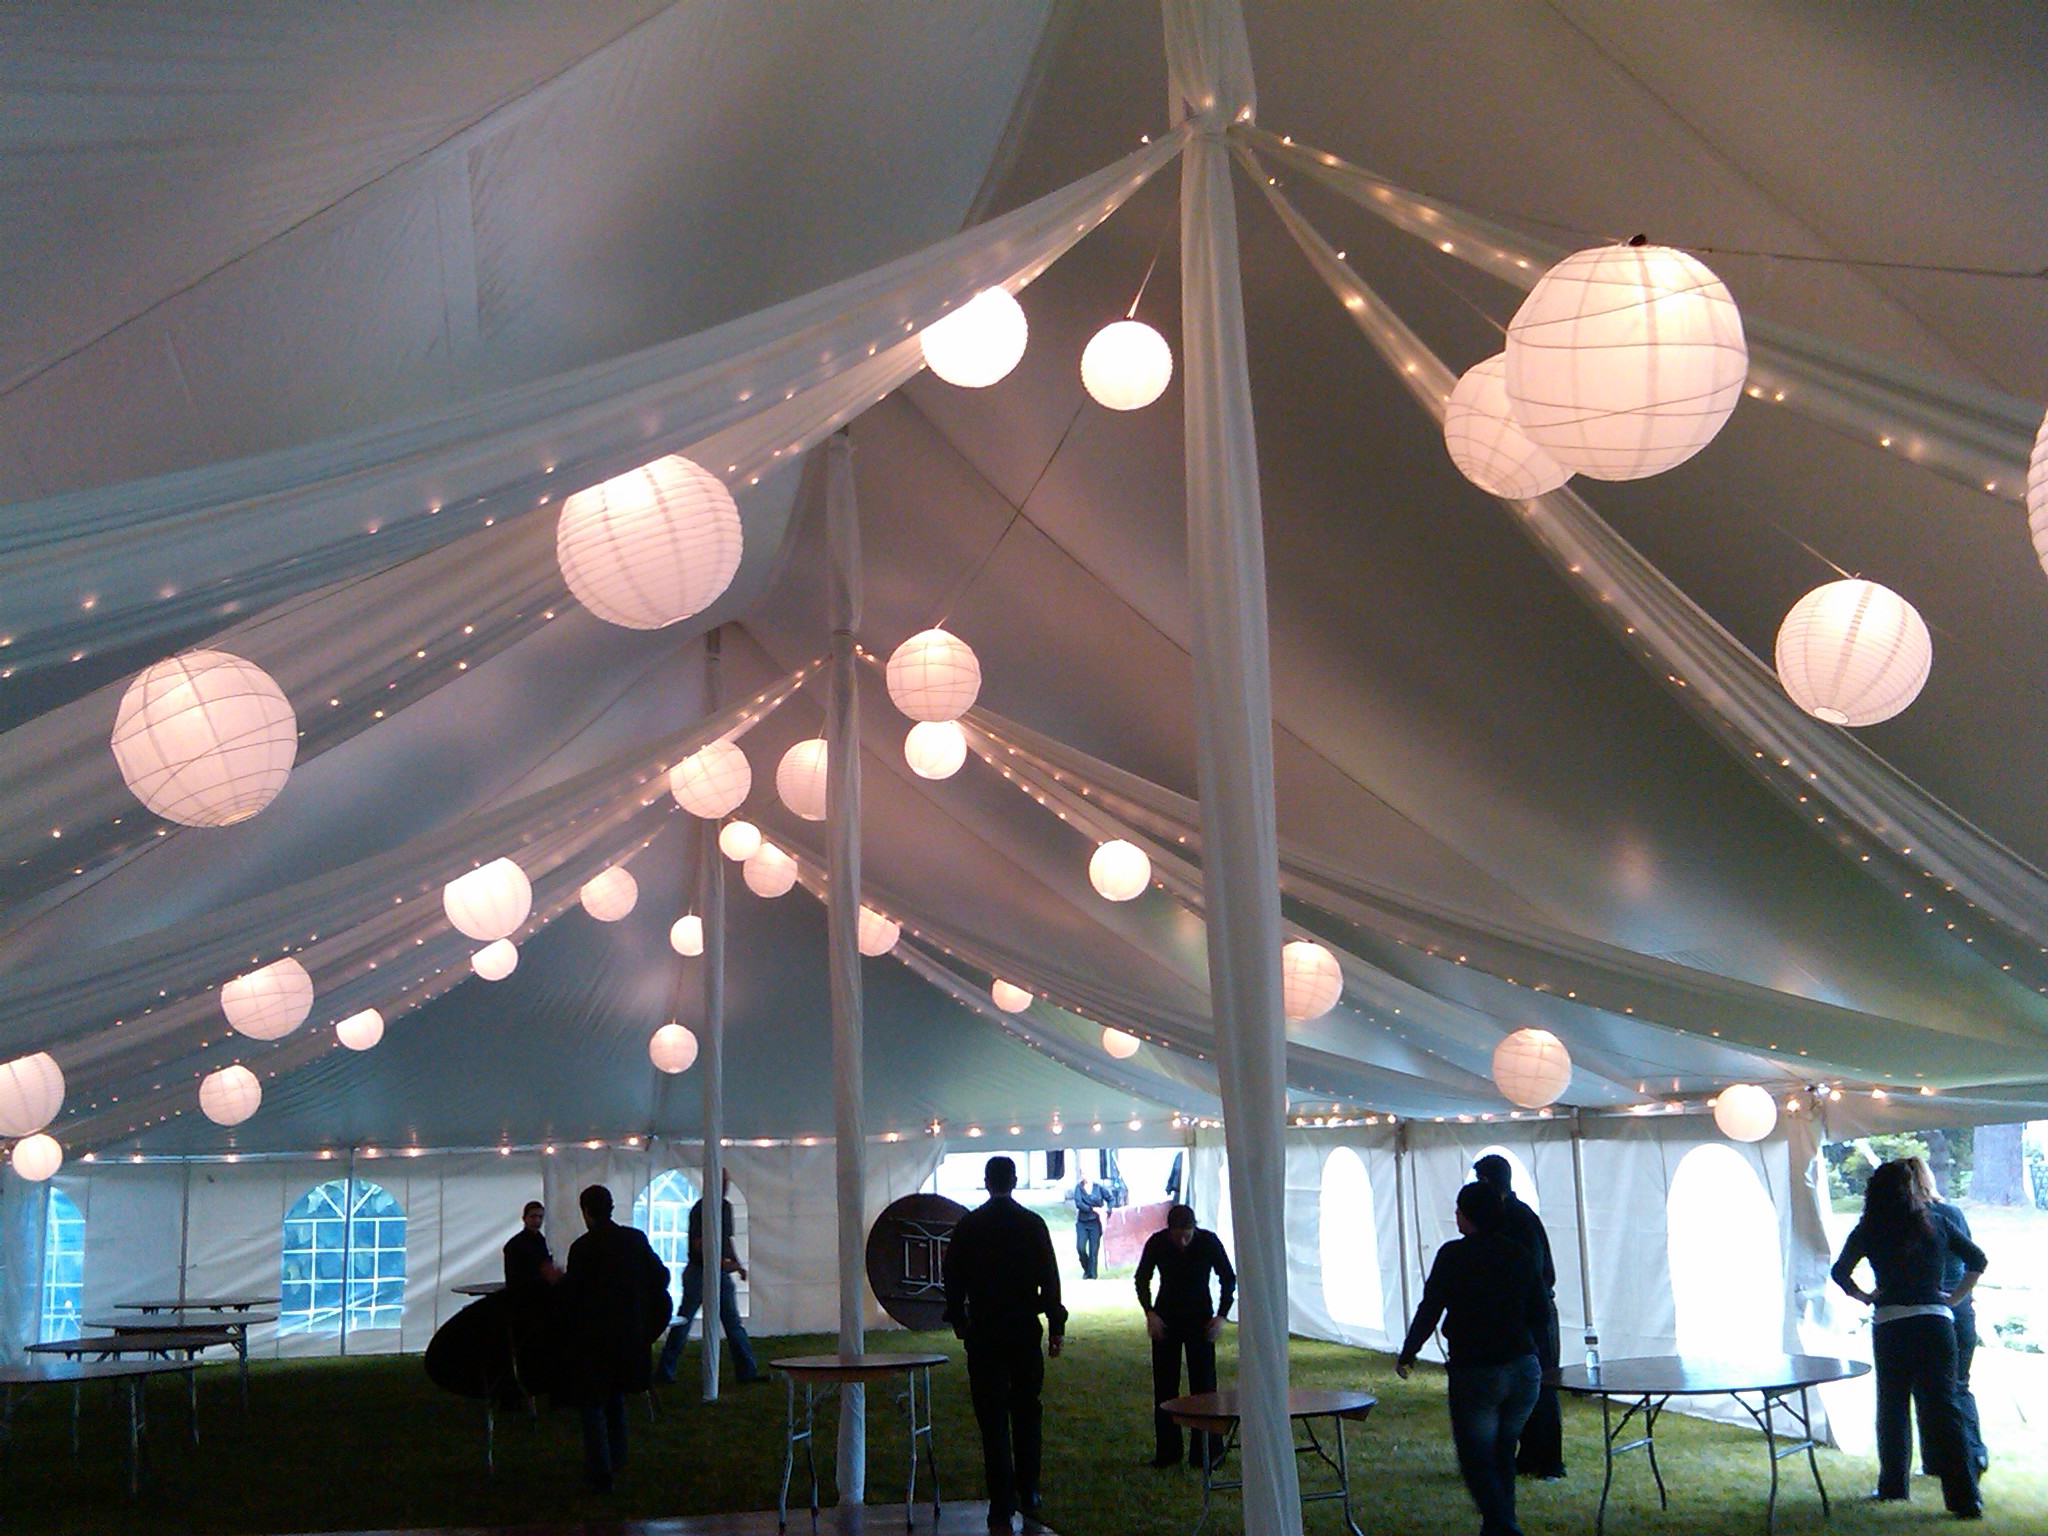 Fabric Swags with Twinkle Lights and Paper Lanterns in a Pole Tent